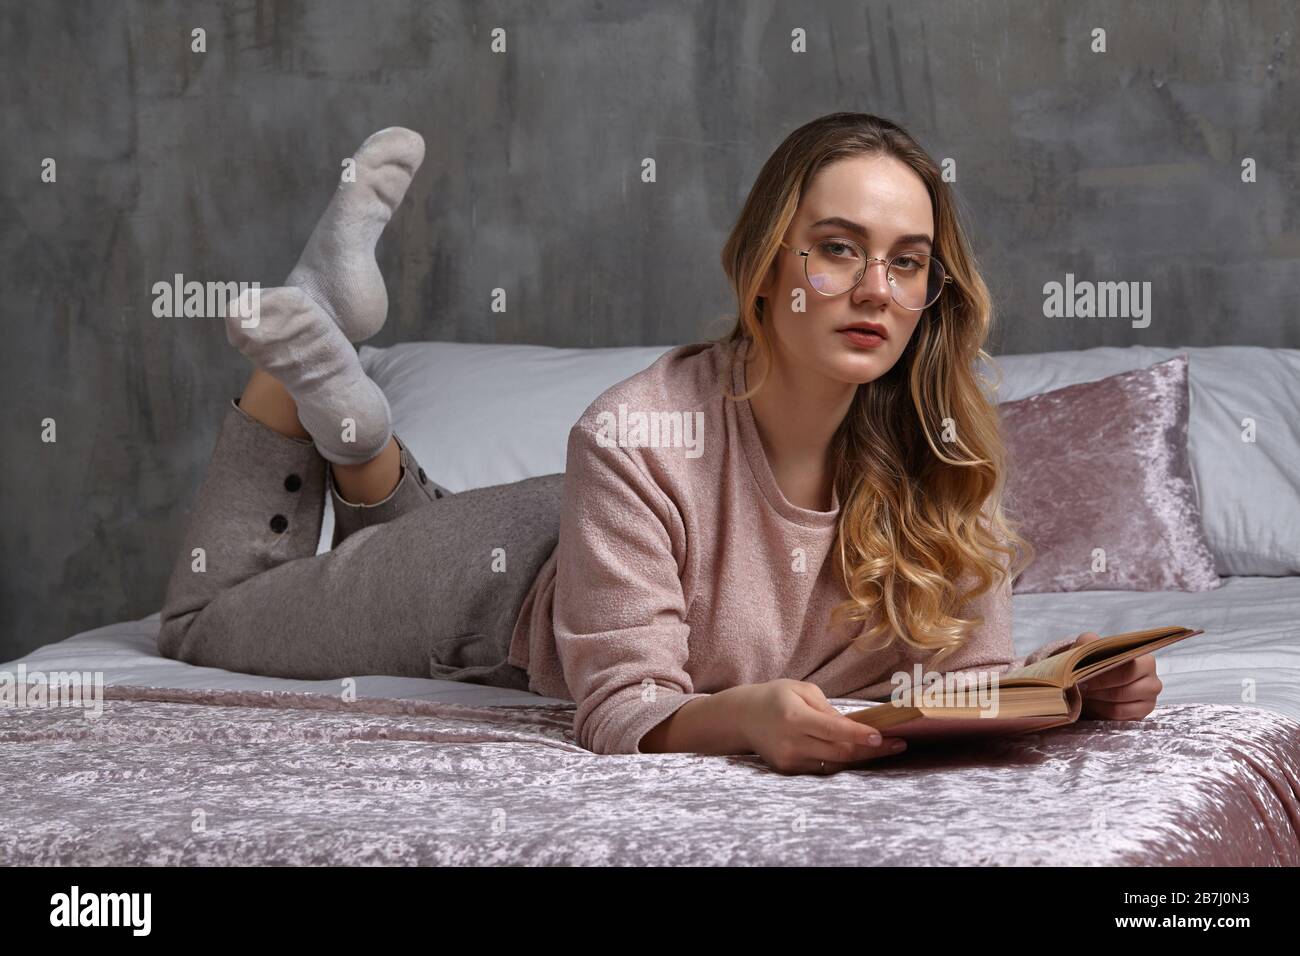 Blonde woman in glasses, casual clothing. She is looking at you, holding book, laying on bed in bedroom. Student, blogger, document studying. Close-up Stock Photo